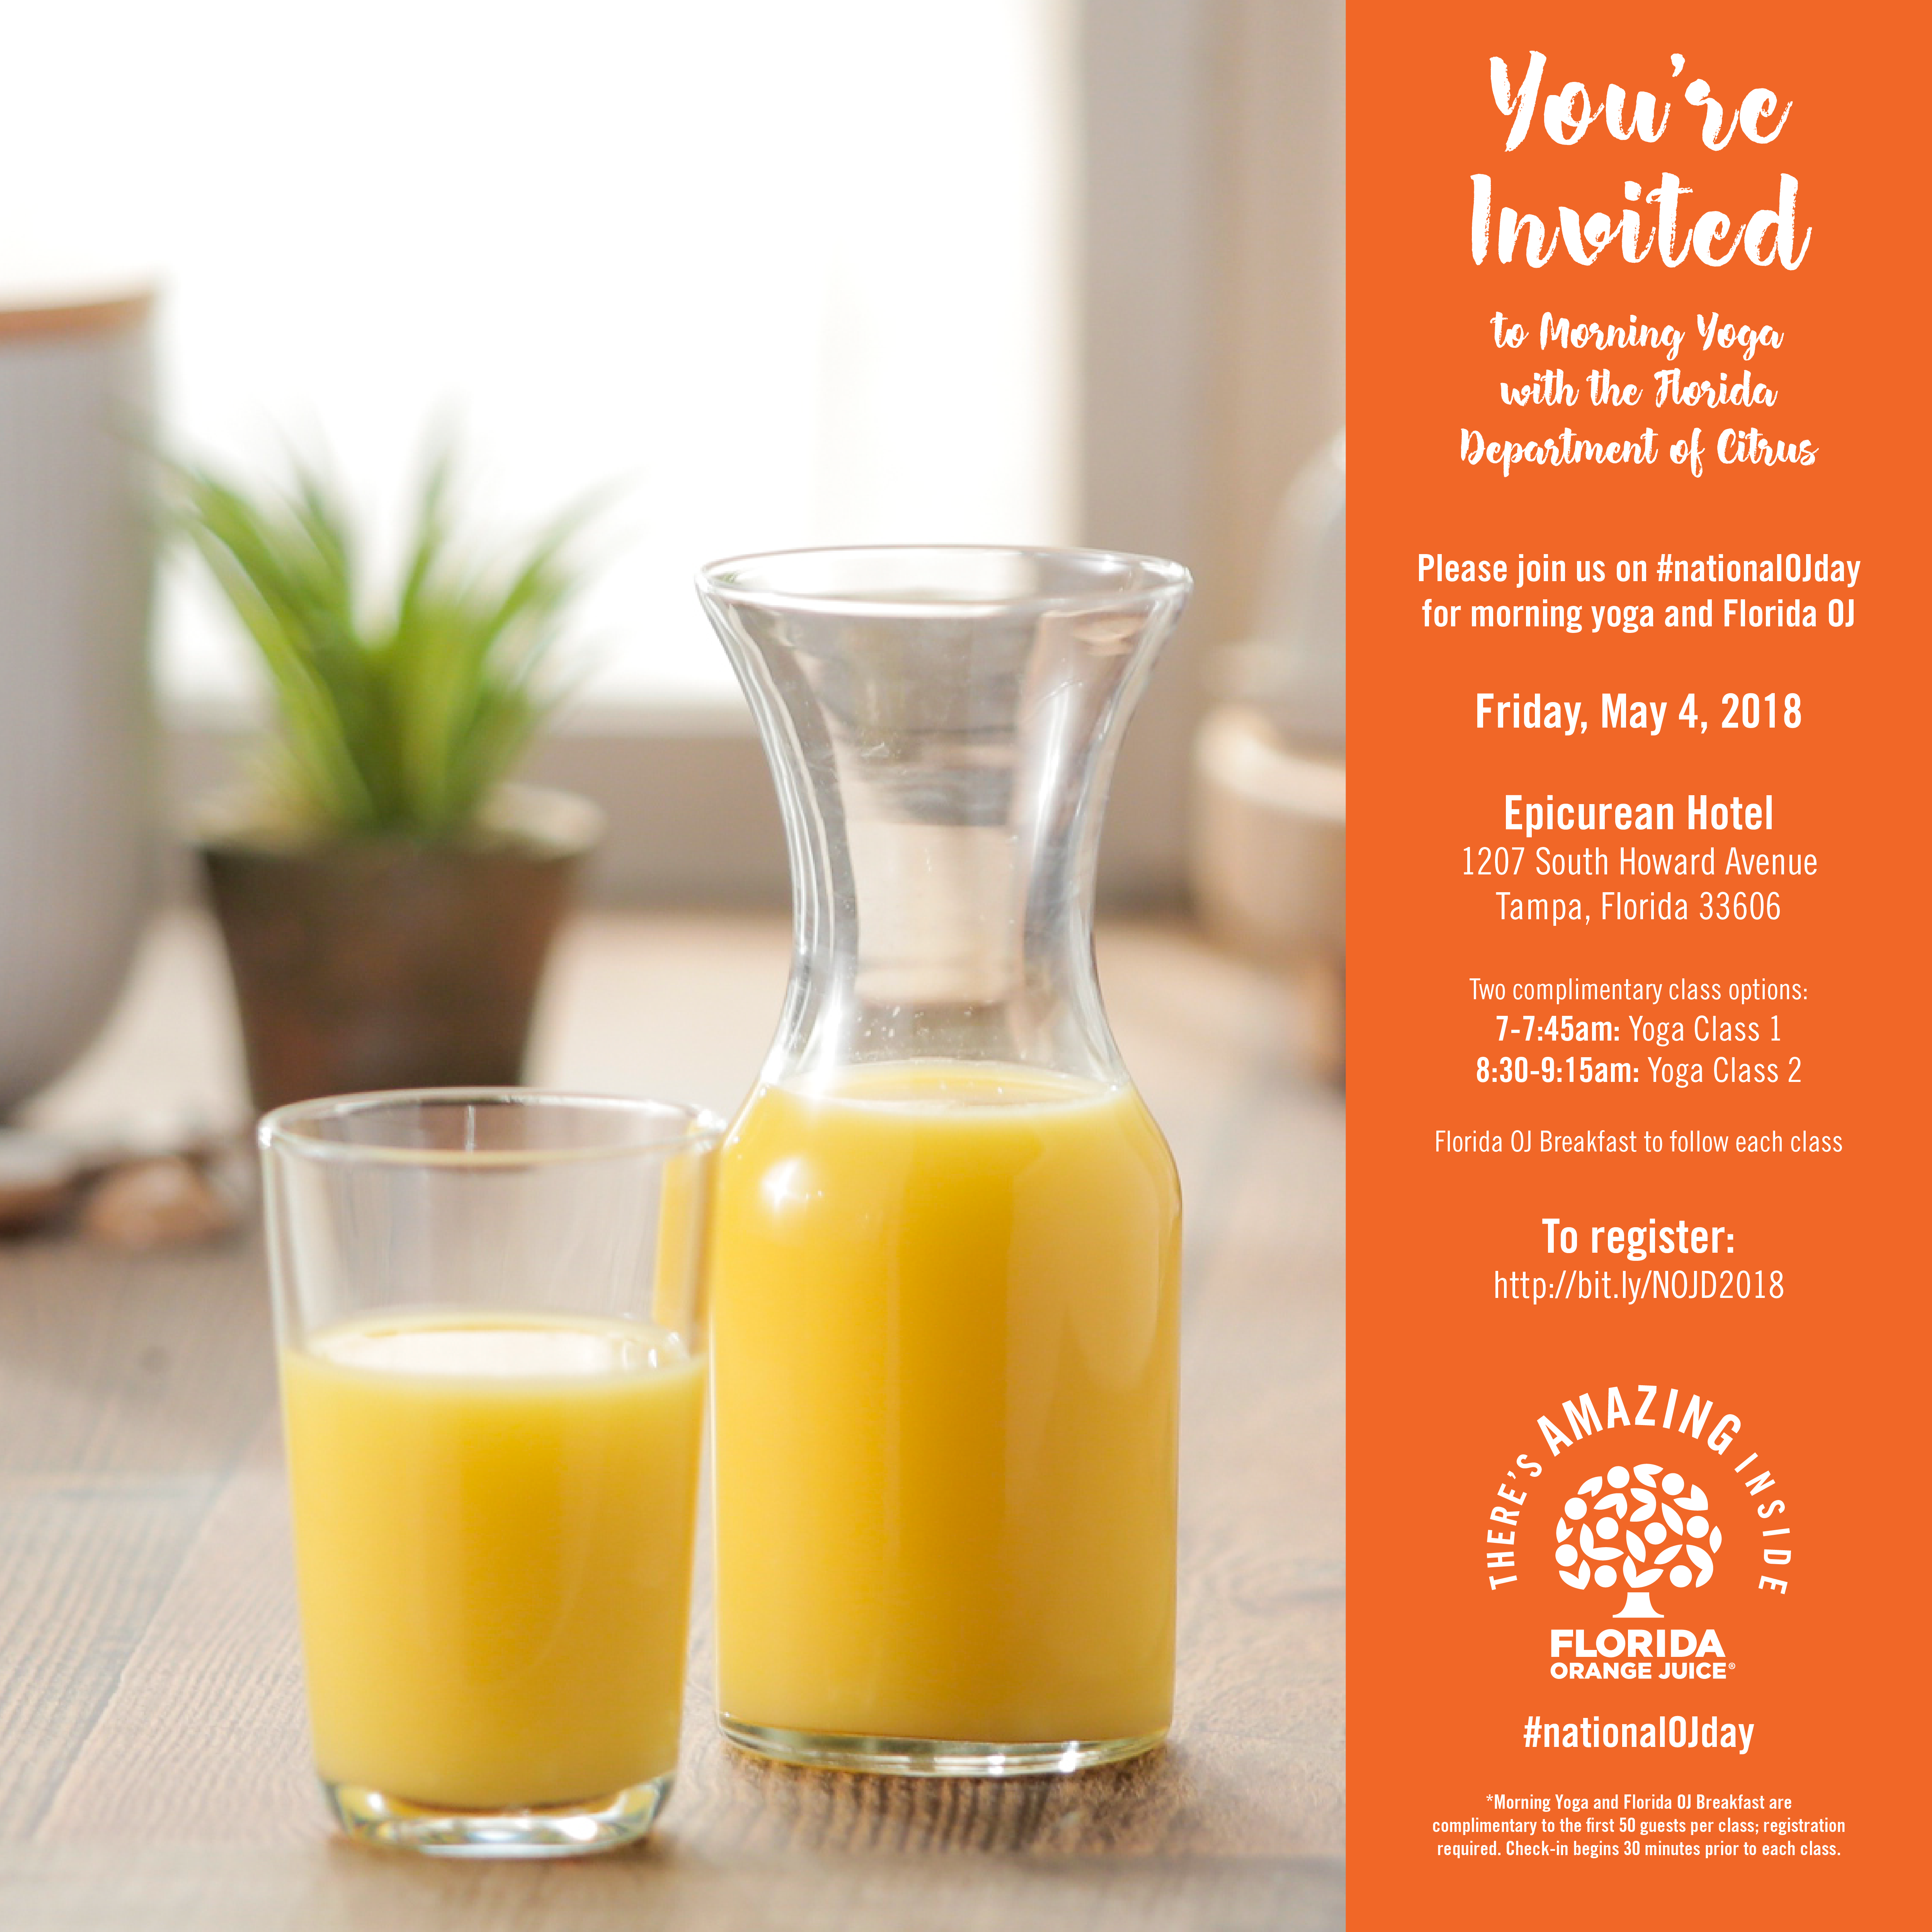 National OJ Day Yoga Event in Tampa, Florida